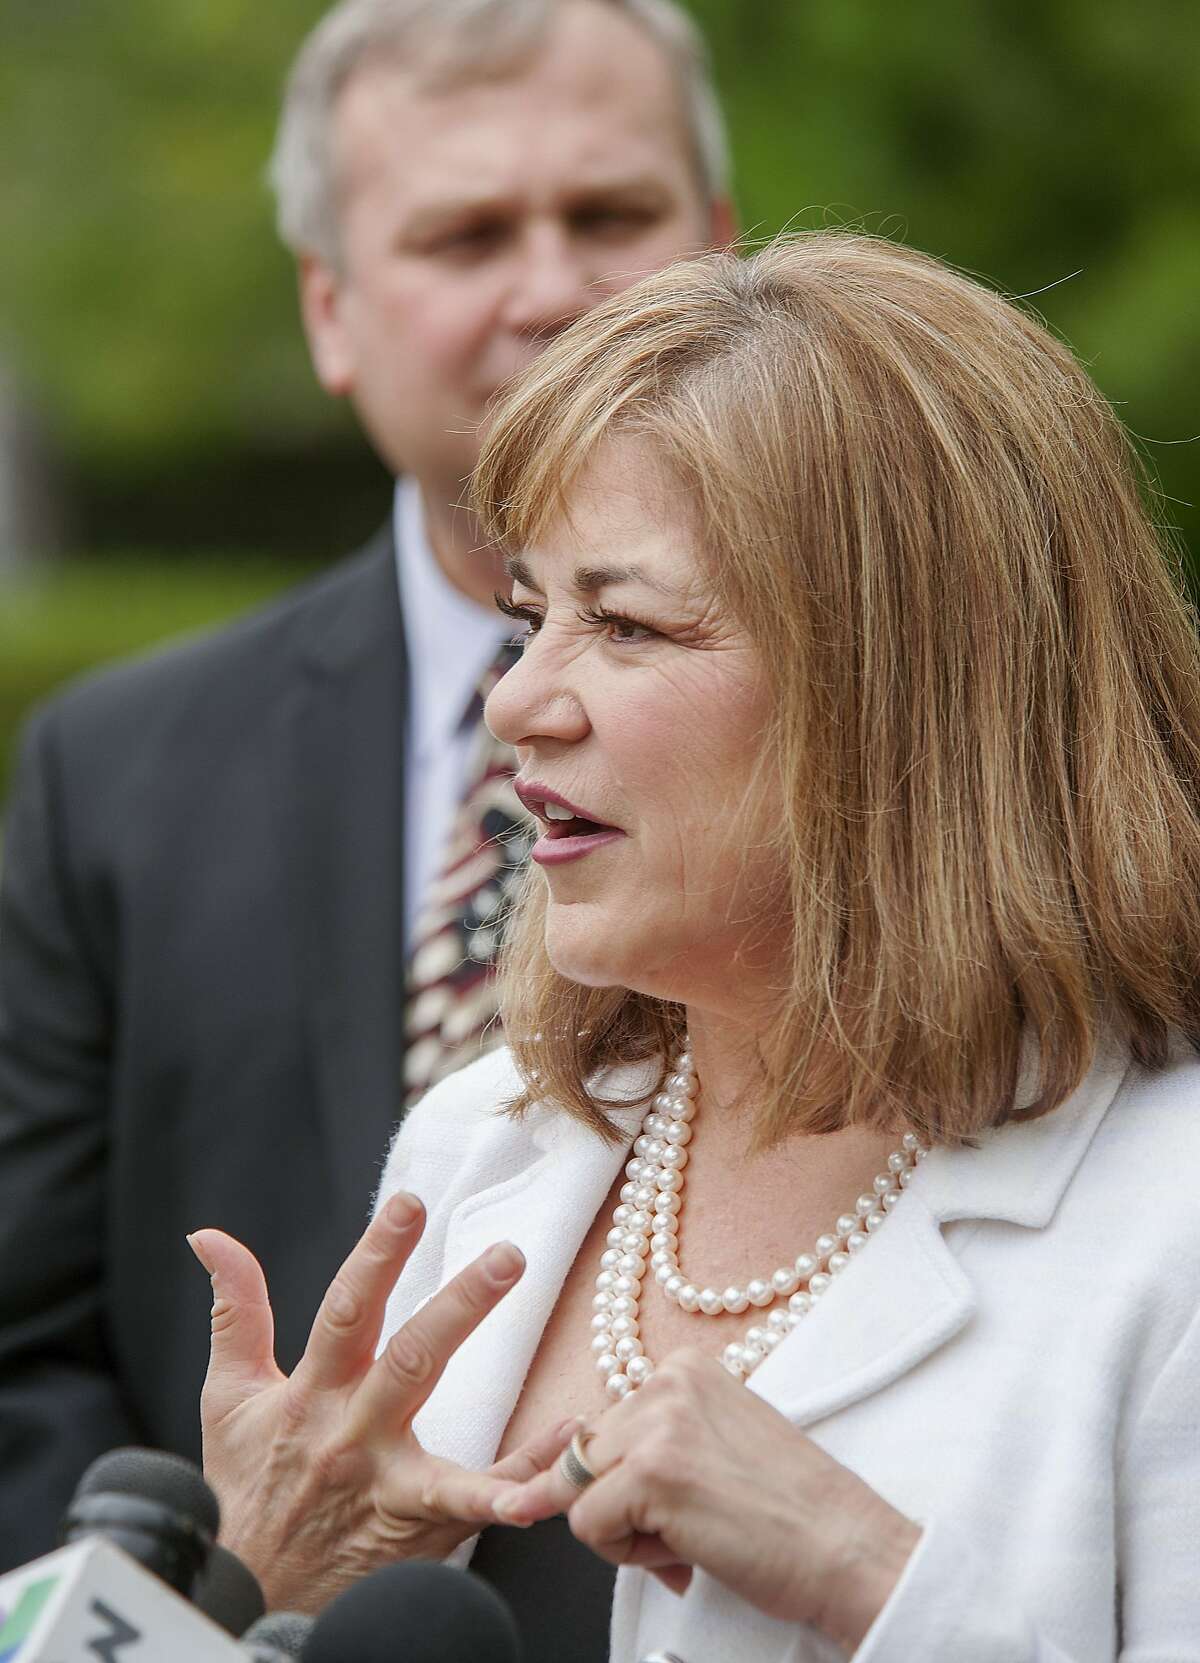 U.S. Rep. Loretta Sanchez answers questions after casting her ballot during a short press conference as her husband Jack Einwechter of Orange listens, Tuesday, June 7, 2016, at Orange High School, in Orange, Calif. Sanchez is running against California Attorney General Kamala Harris for the United States Senate seat replacing retiring Sen. Barbara Boxer. 